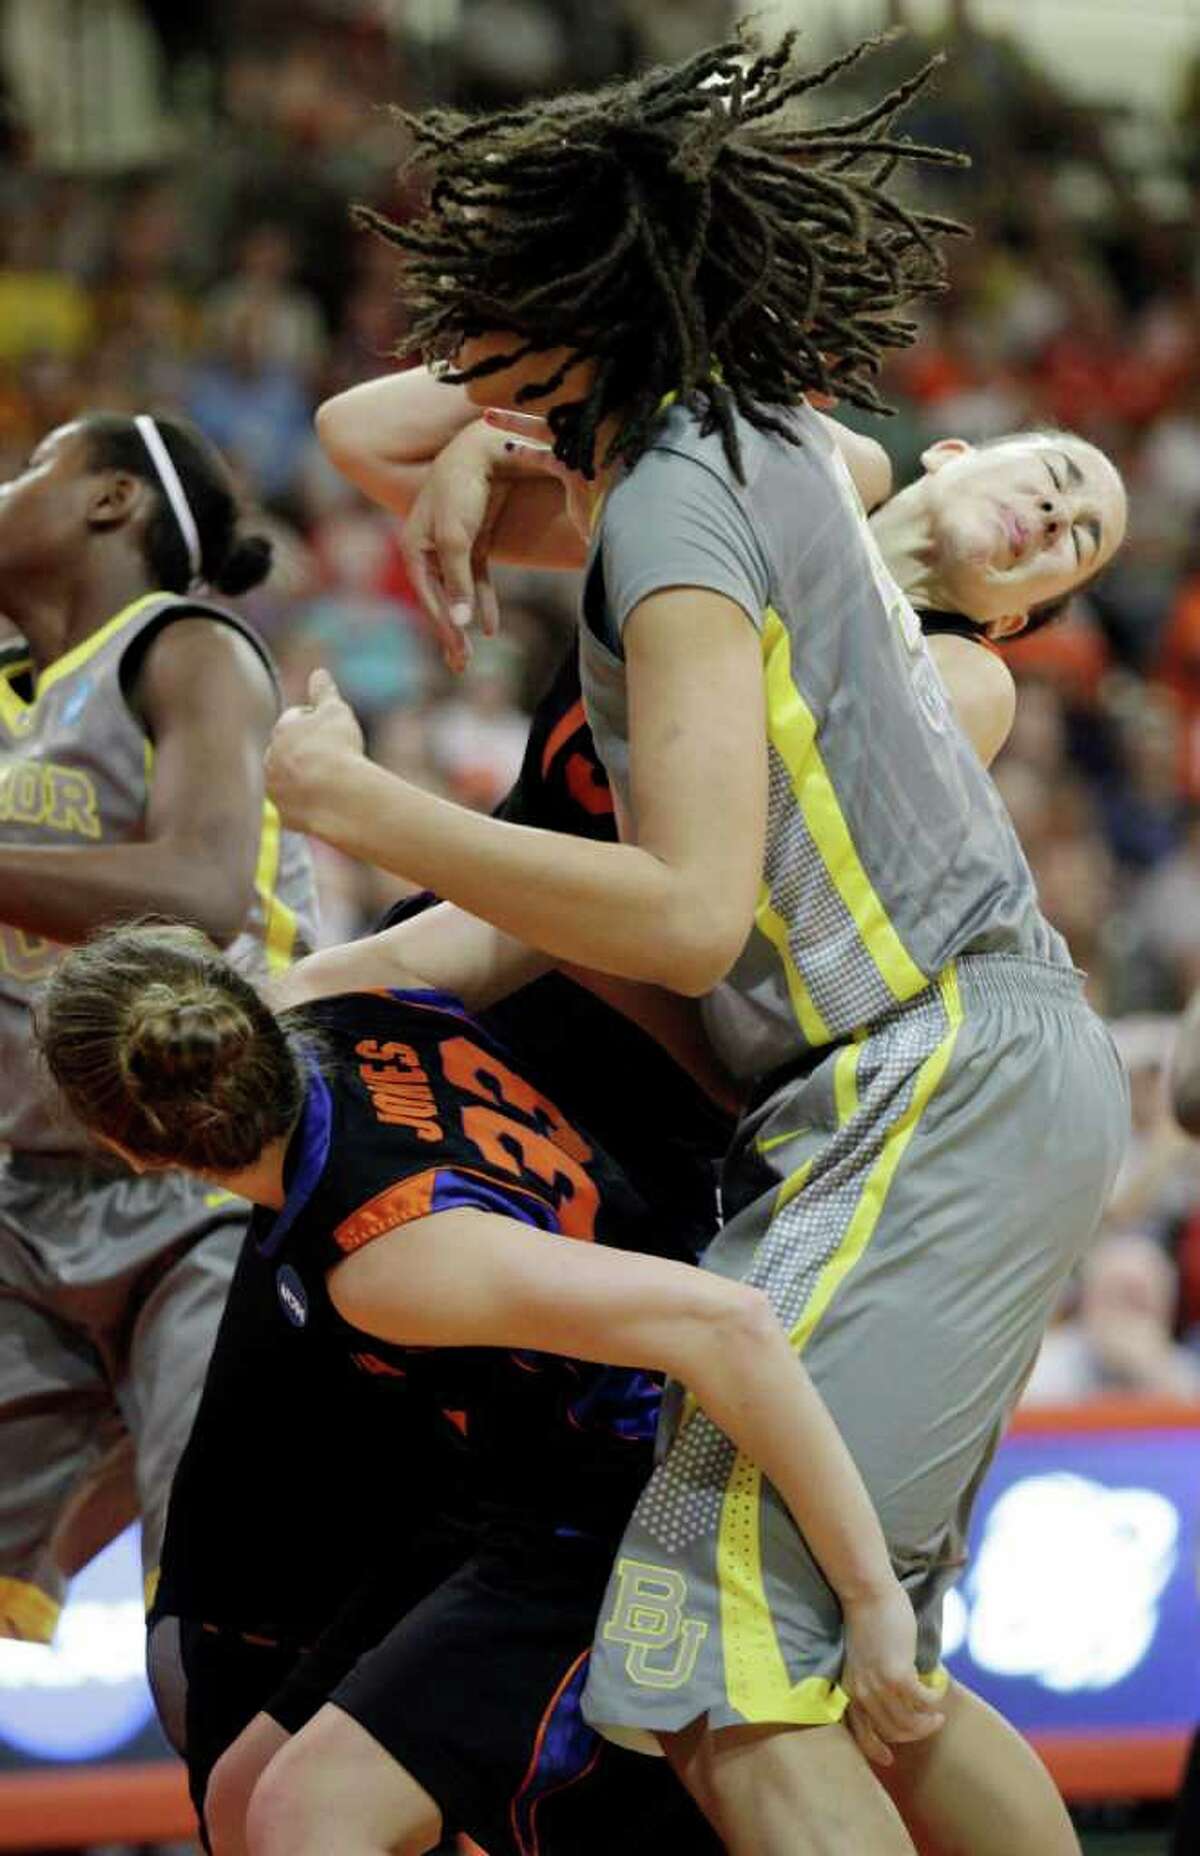 Baylor's Brittney Griner, middle, battles the lane with Florida's Jordan Jones (33) and Azania Stewart, right, during the first half of a second-round NCAA women's college basketball tournament game, Tuesday, March 20, 2012, in Bowling Green, Ohio. (AP Photo/J.D. Pooley)